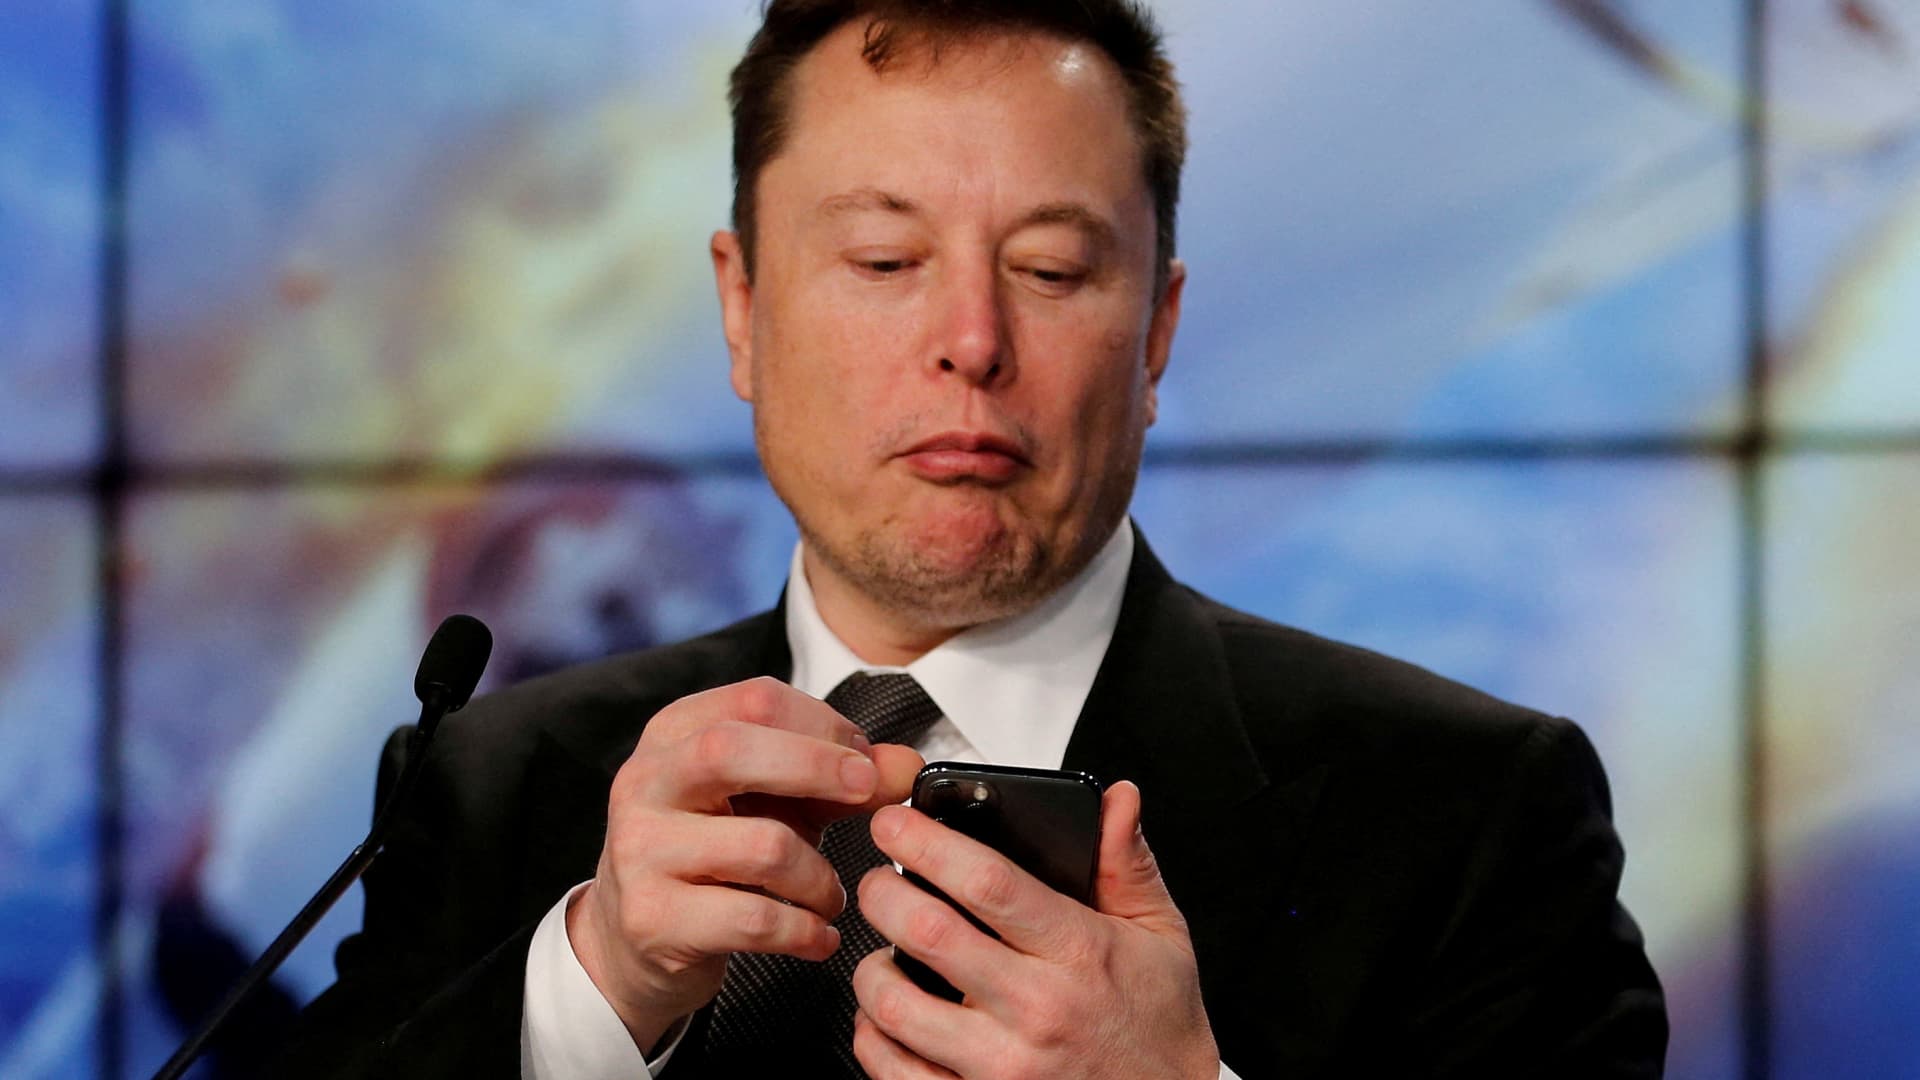 Musk on possible layoffs at Twitter: The company needs to get healthy